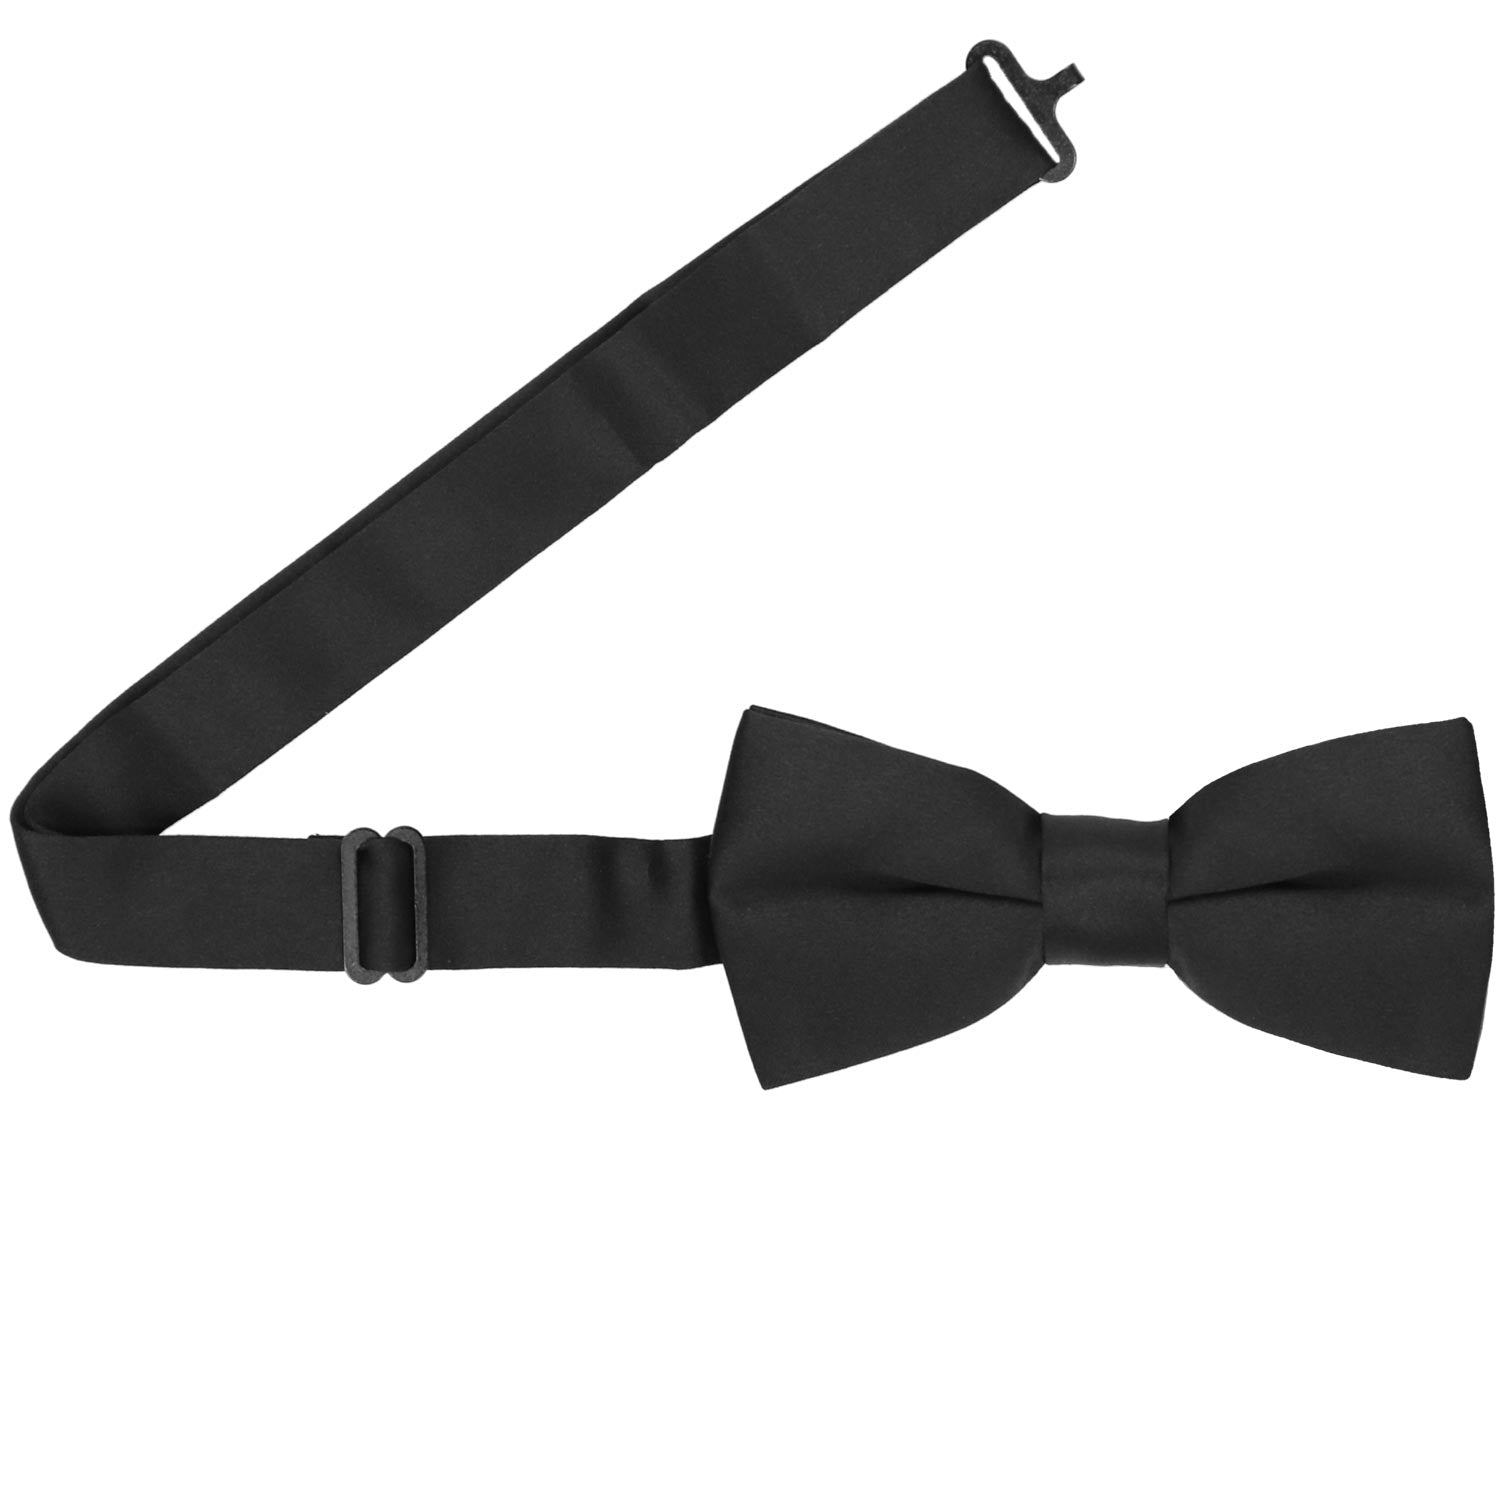 TieMart Red Band Collar Bow Tie